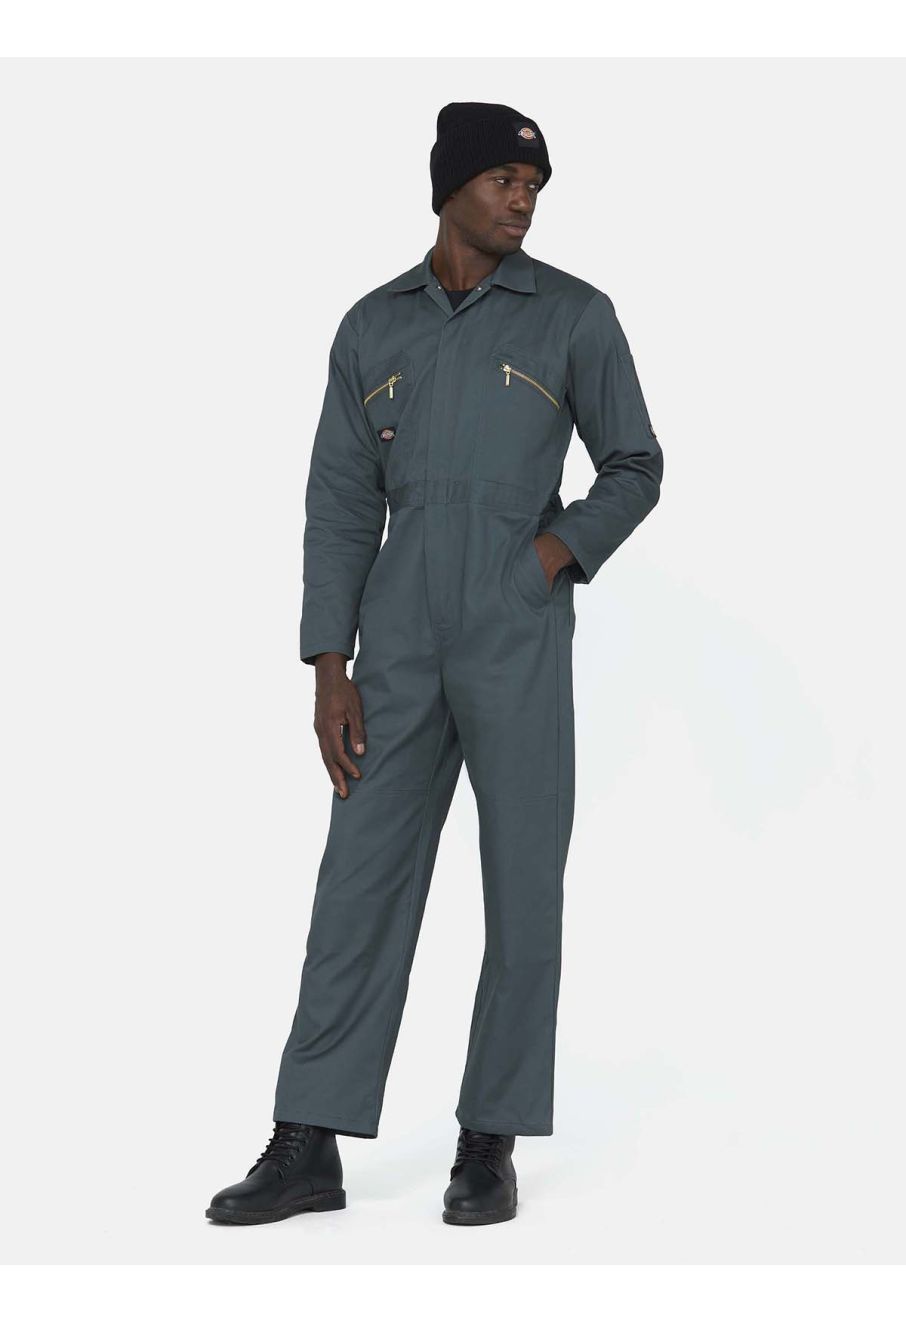 Redhawk Overall - Lincoln Green - Dickies